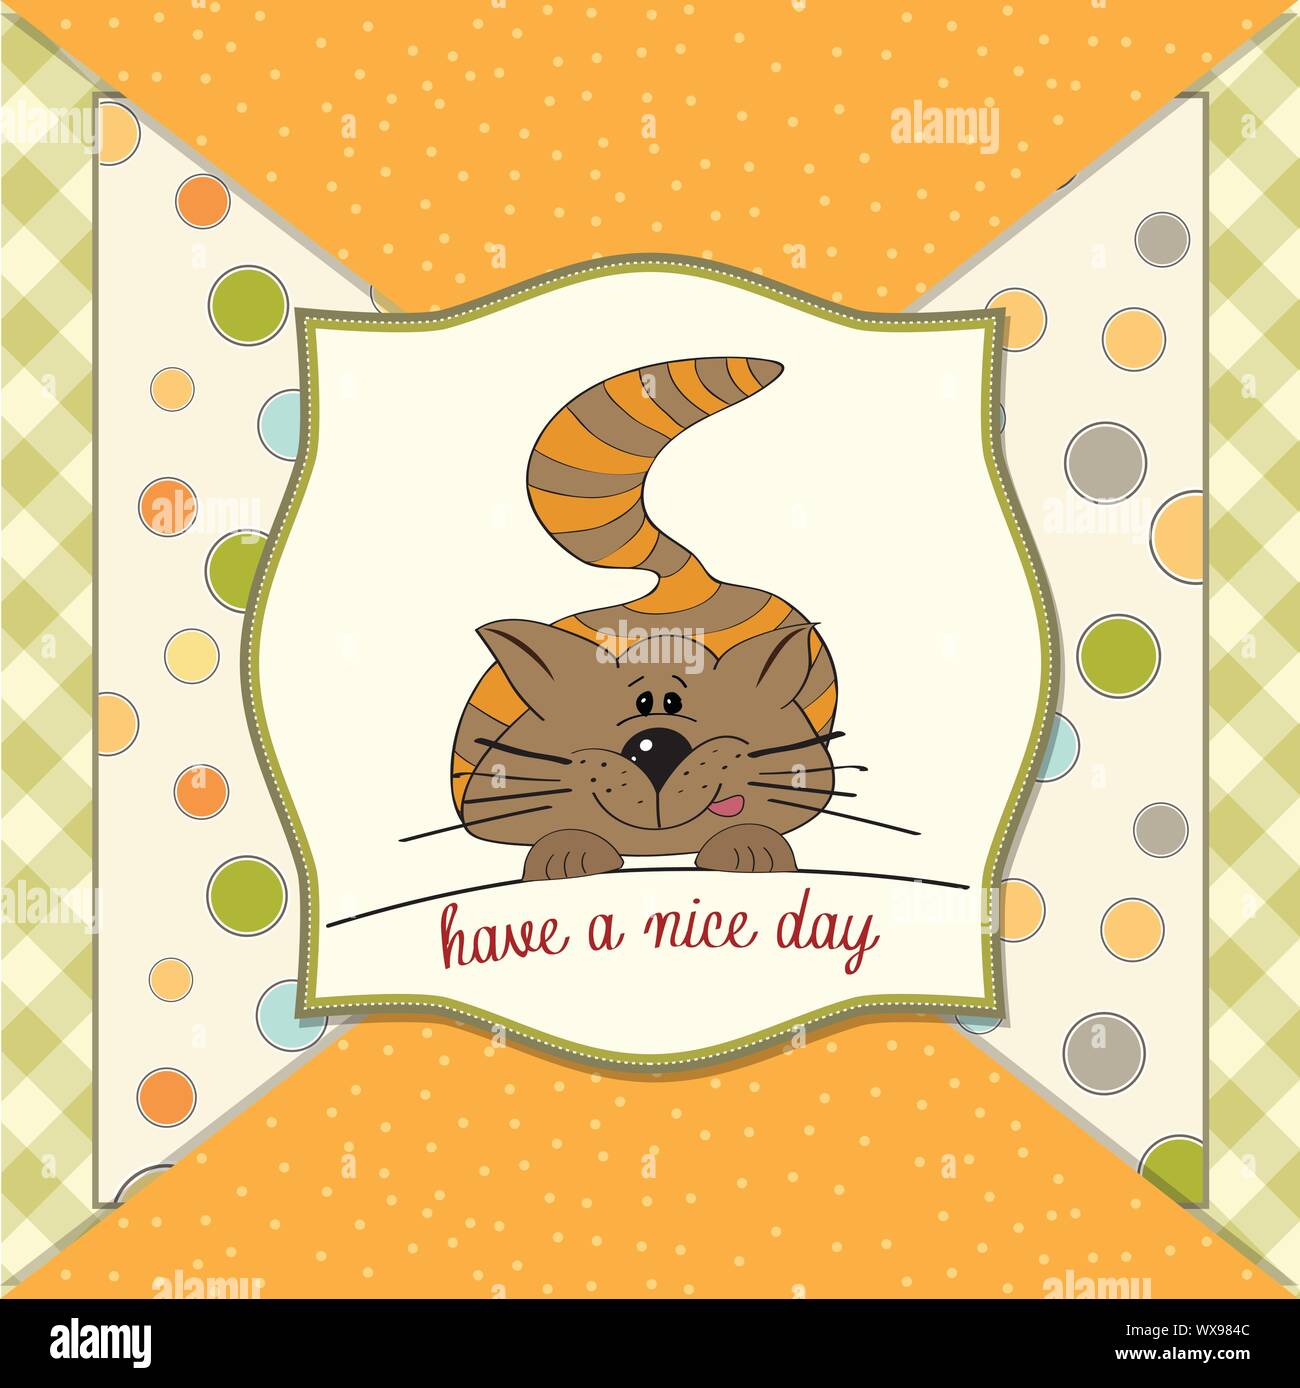 kitty wishes you a nice day Stock Vector